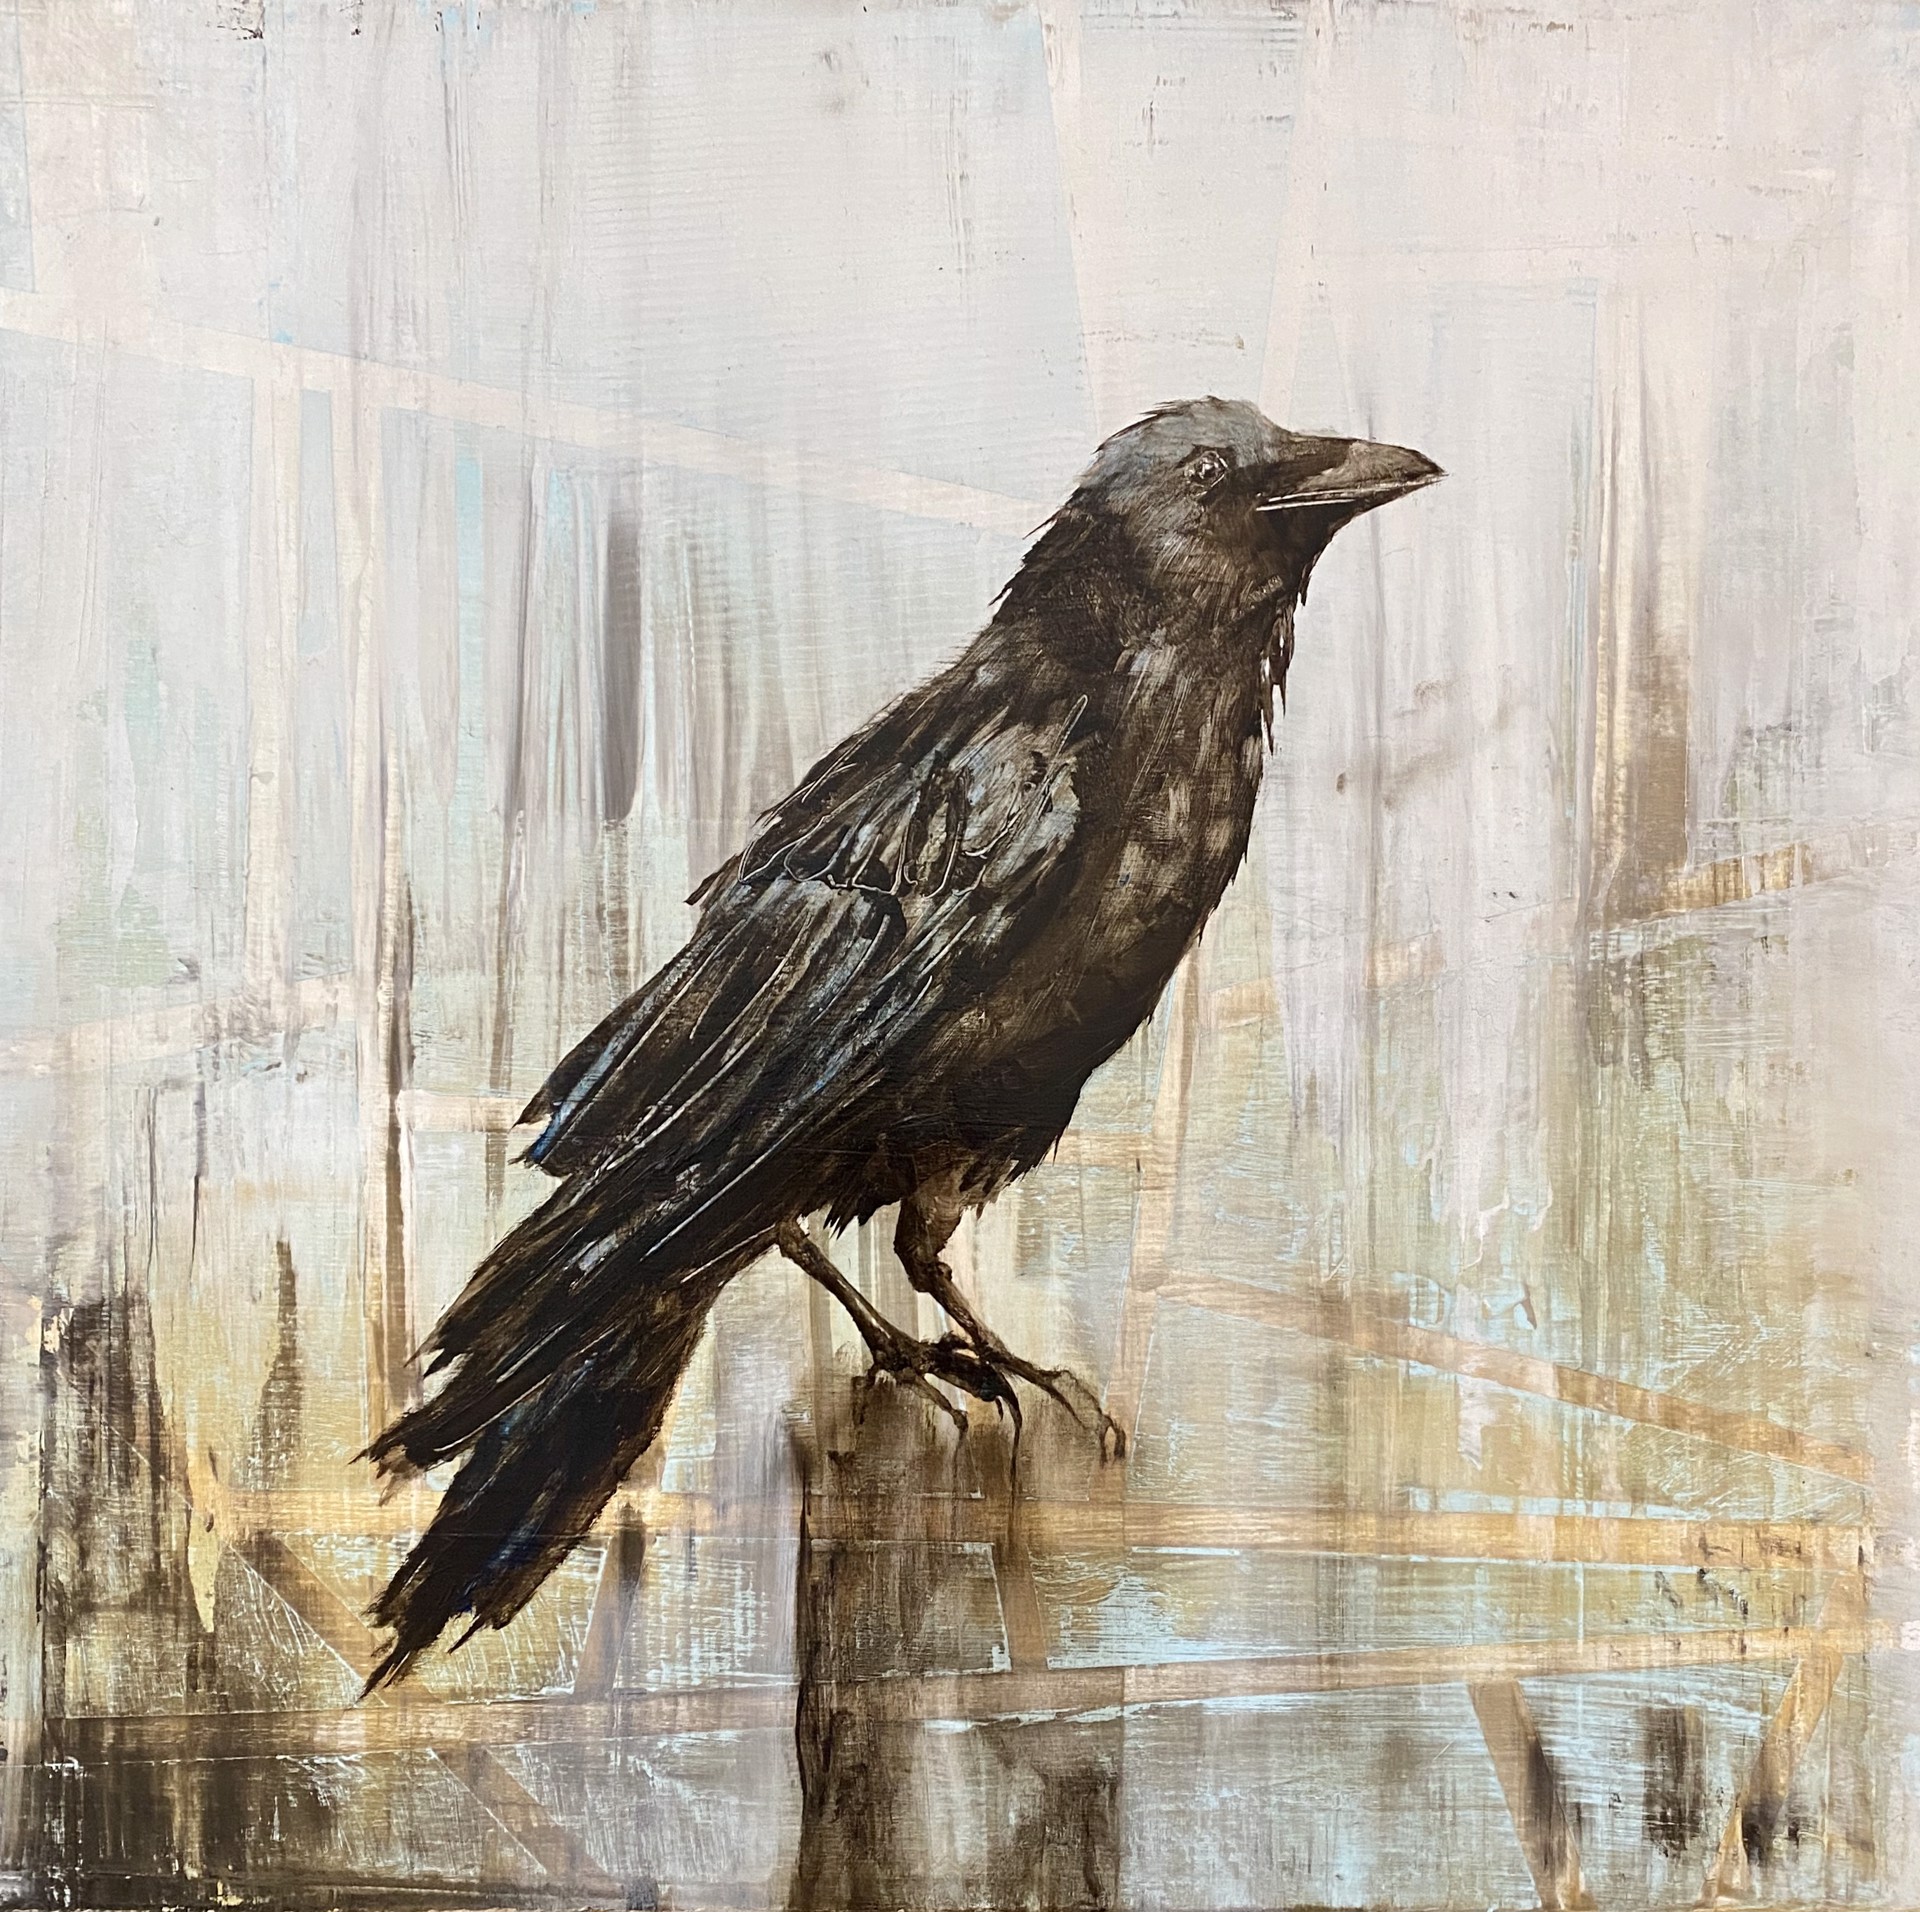 A Original Contemporary Oil Painting Of A Raven With A Abstract Background, By Jenna Von Benedikt